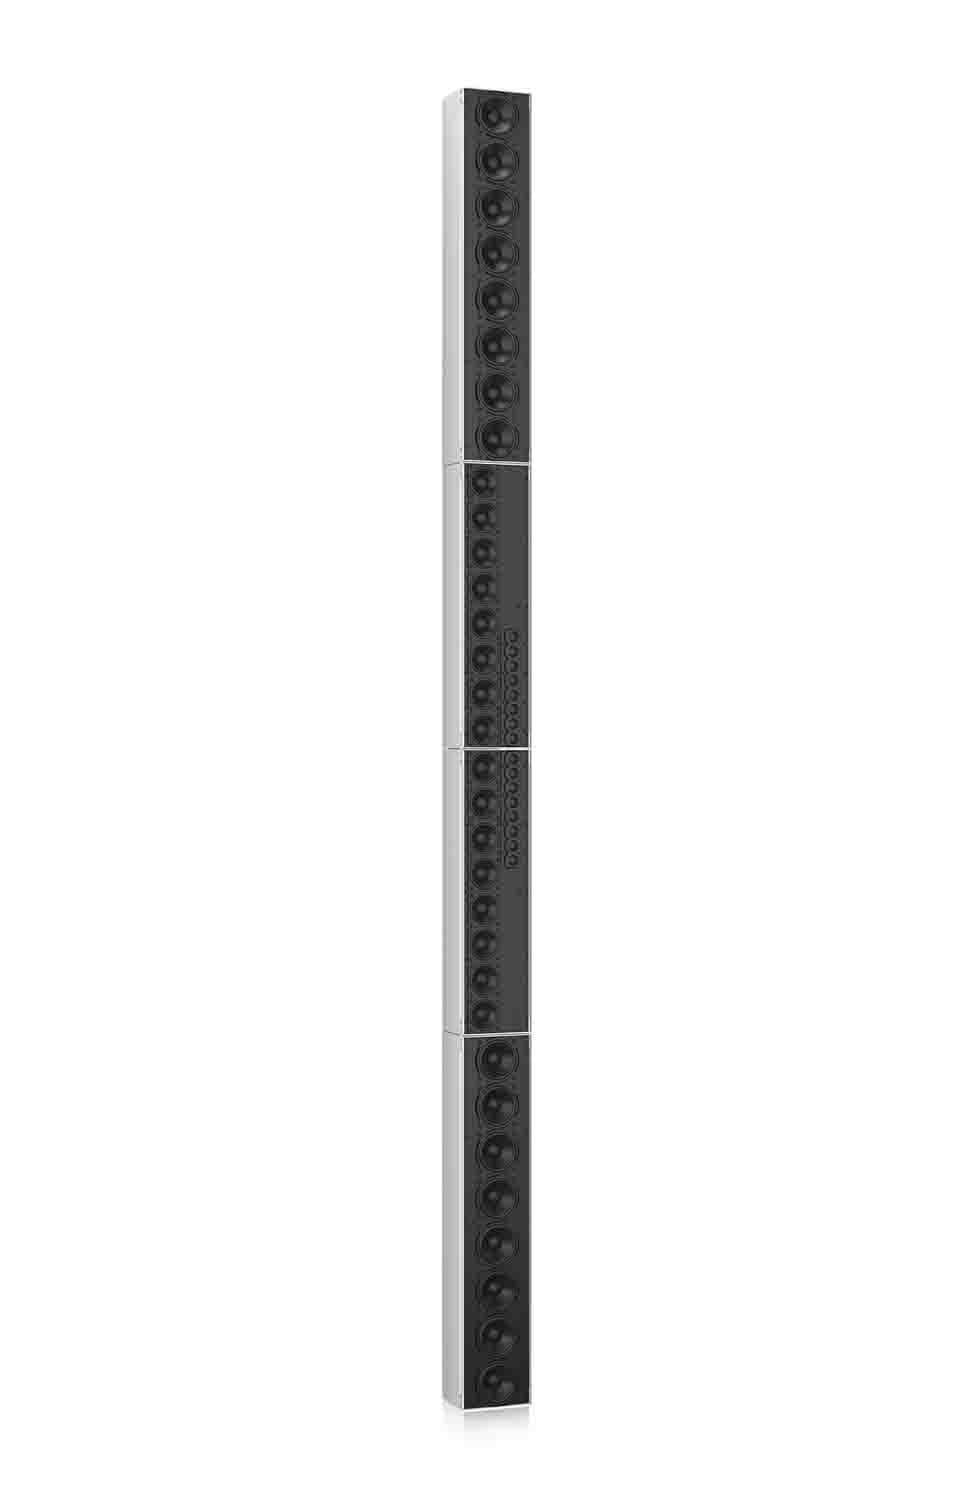 Tannoy QFLEX 48 Digitally Steerable Powered Column Array Loudspeaker with 48 Independently Controlled Drivers - Hollywood DJ